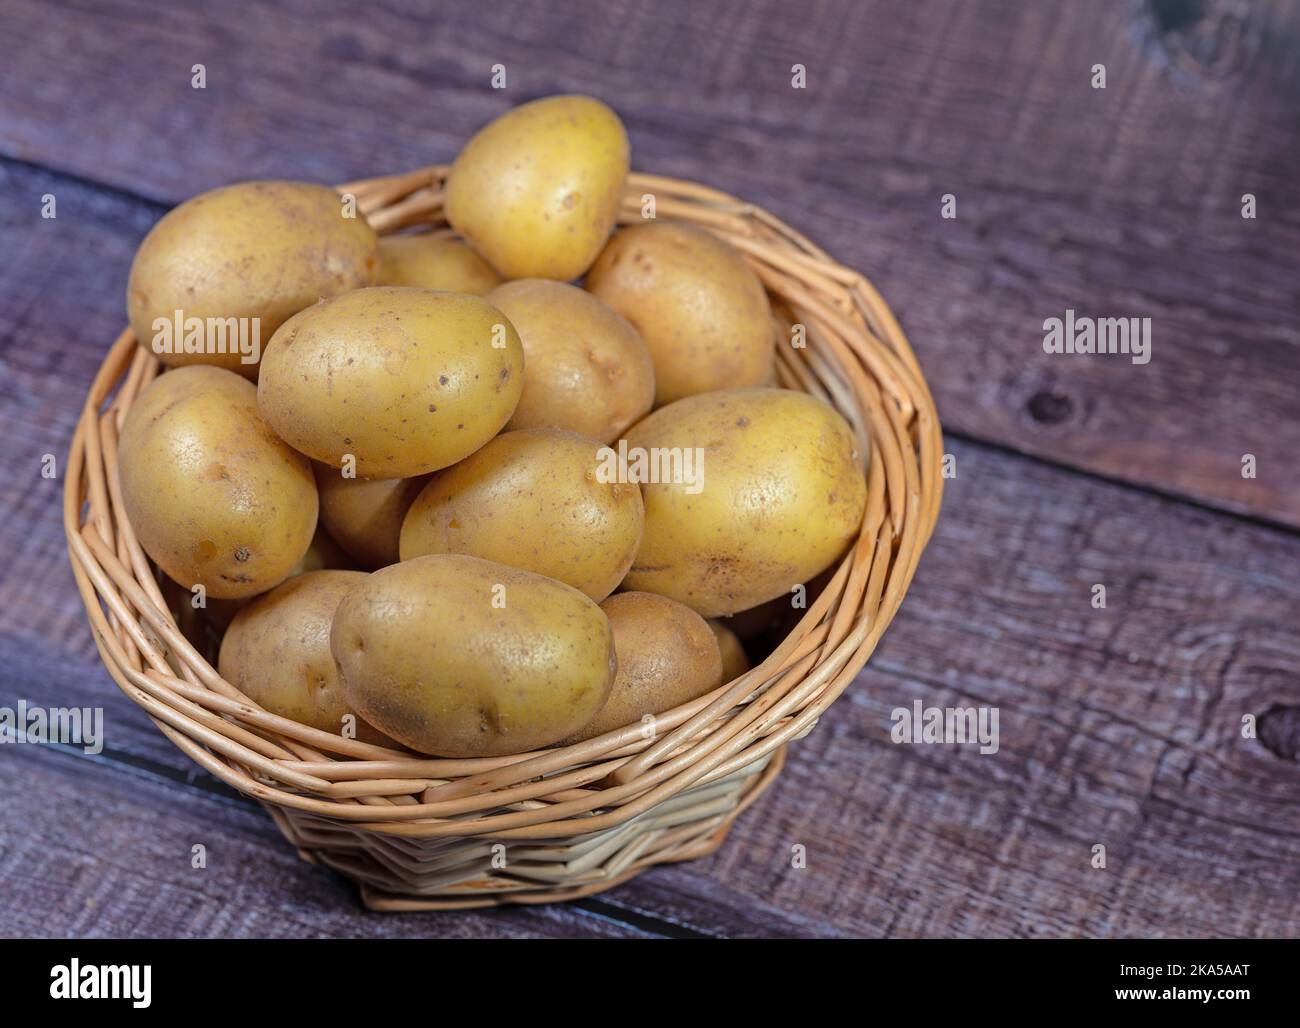 Potatoes in the basket on wooden background Stock Photo